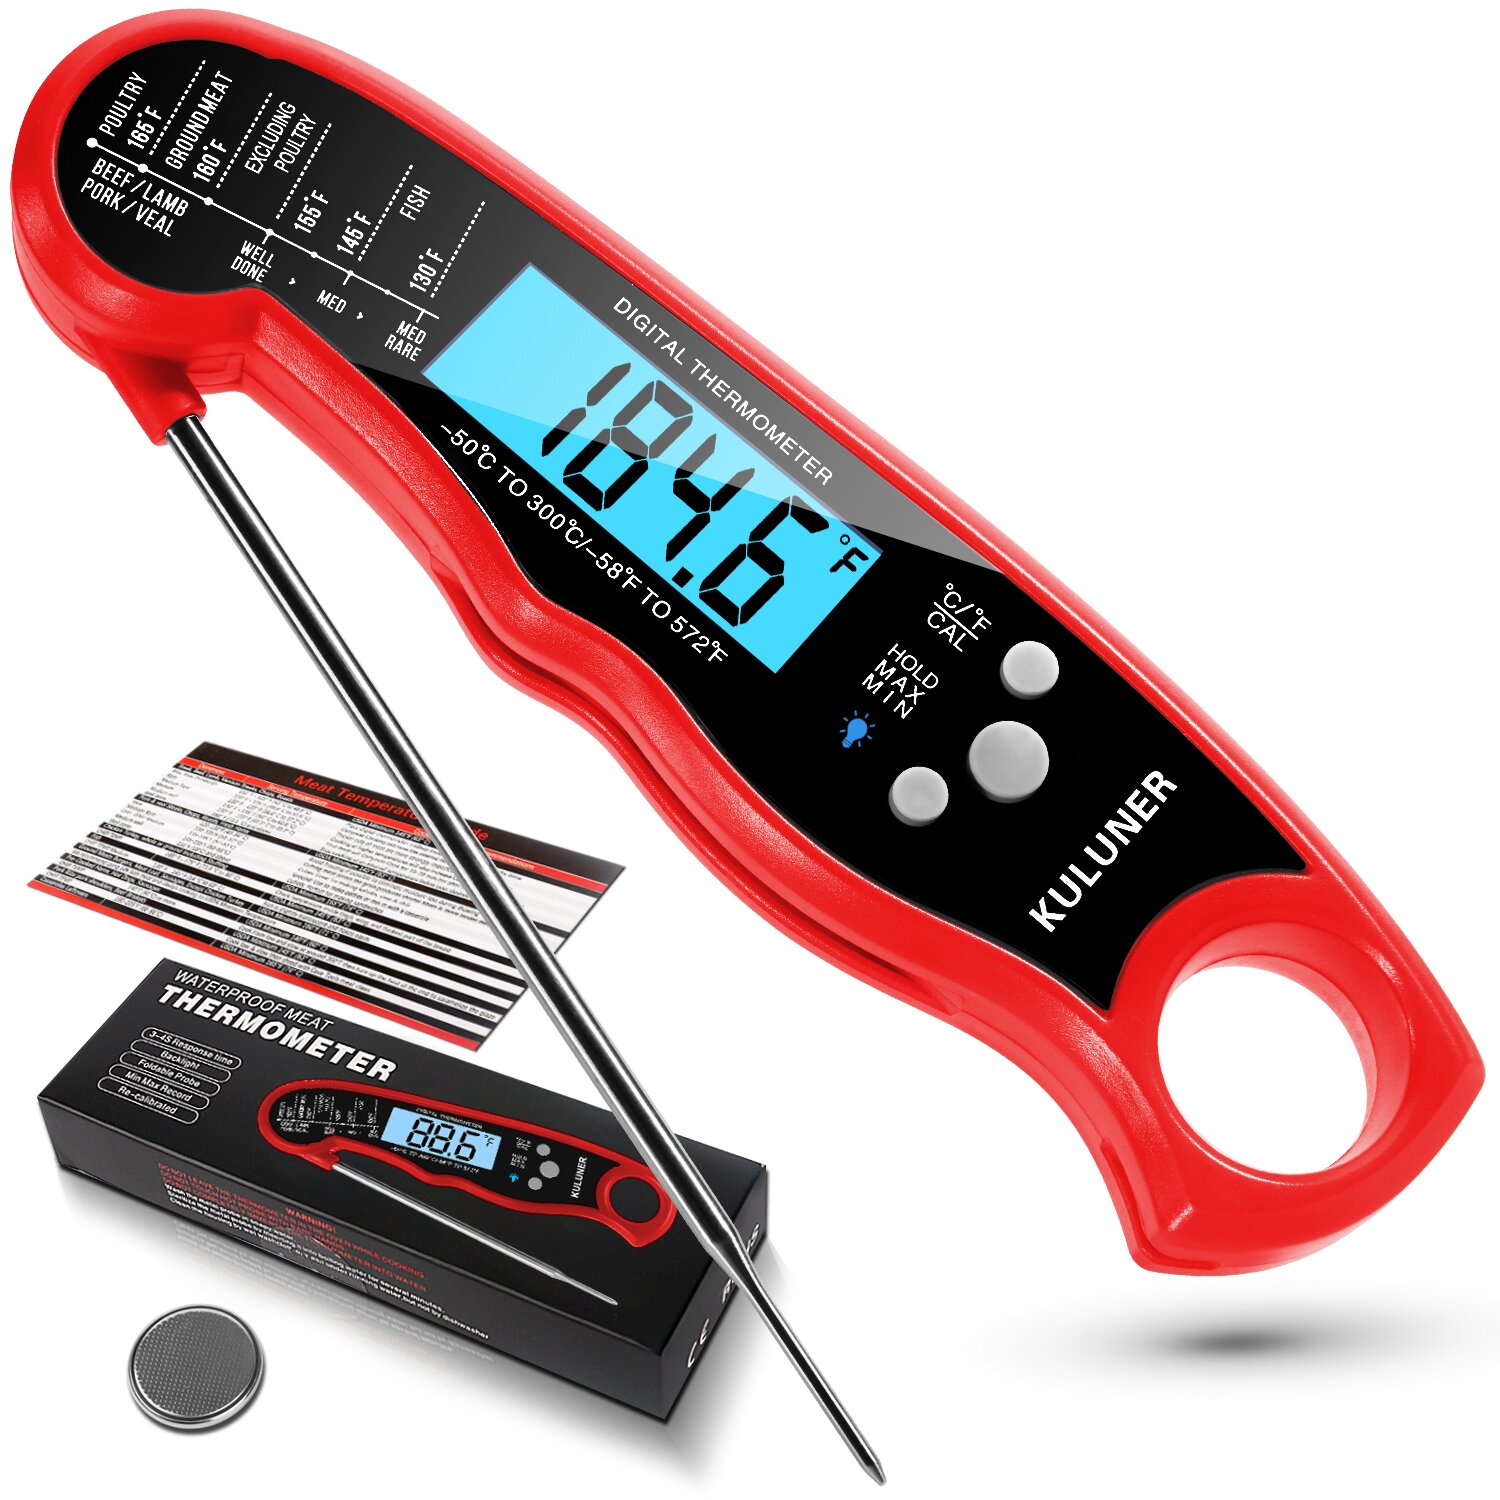 KULUNER TP01 Digital Thermometer Instructions